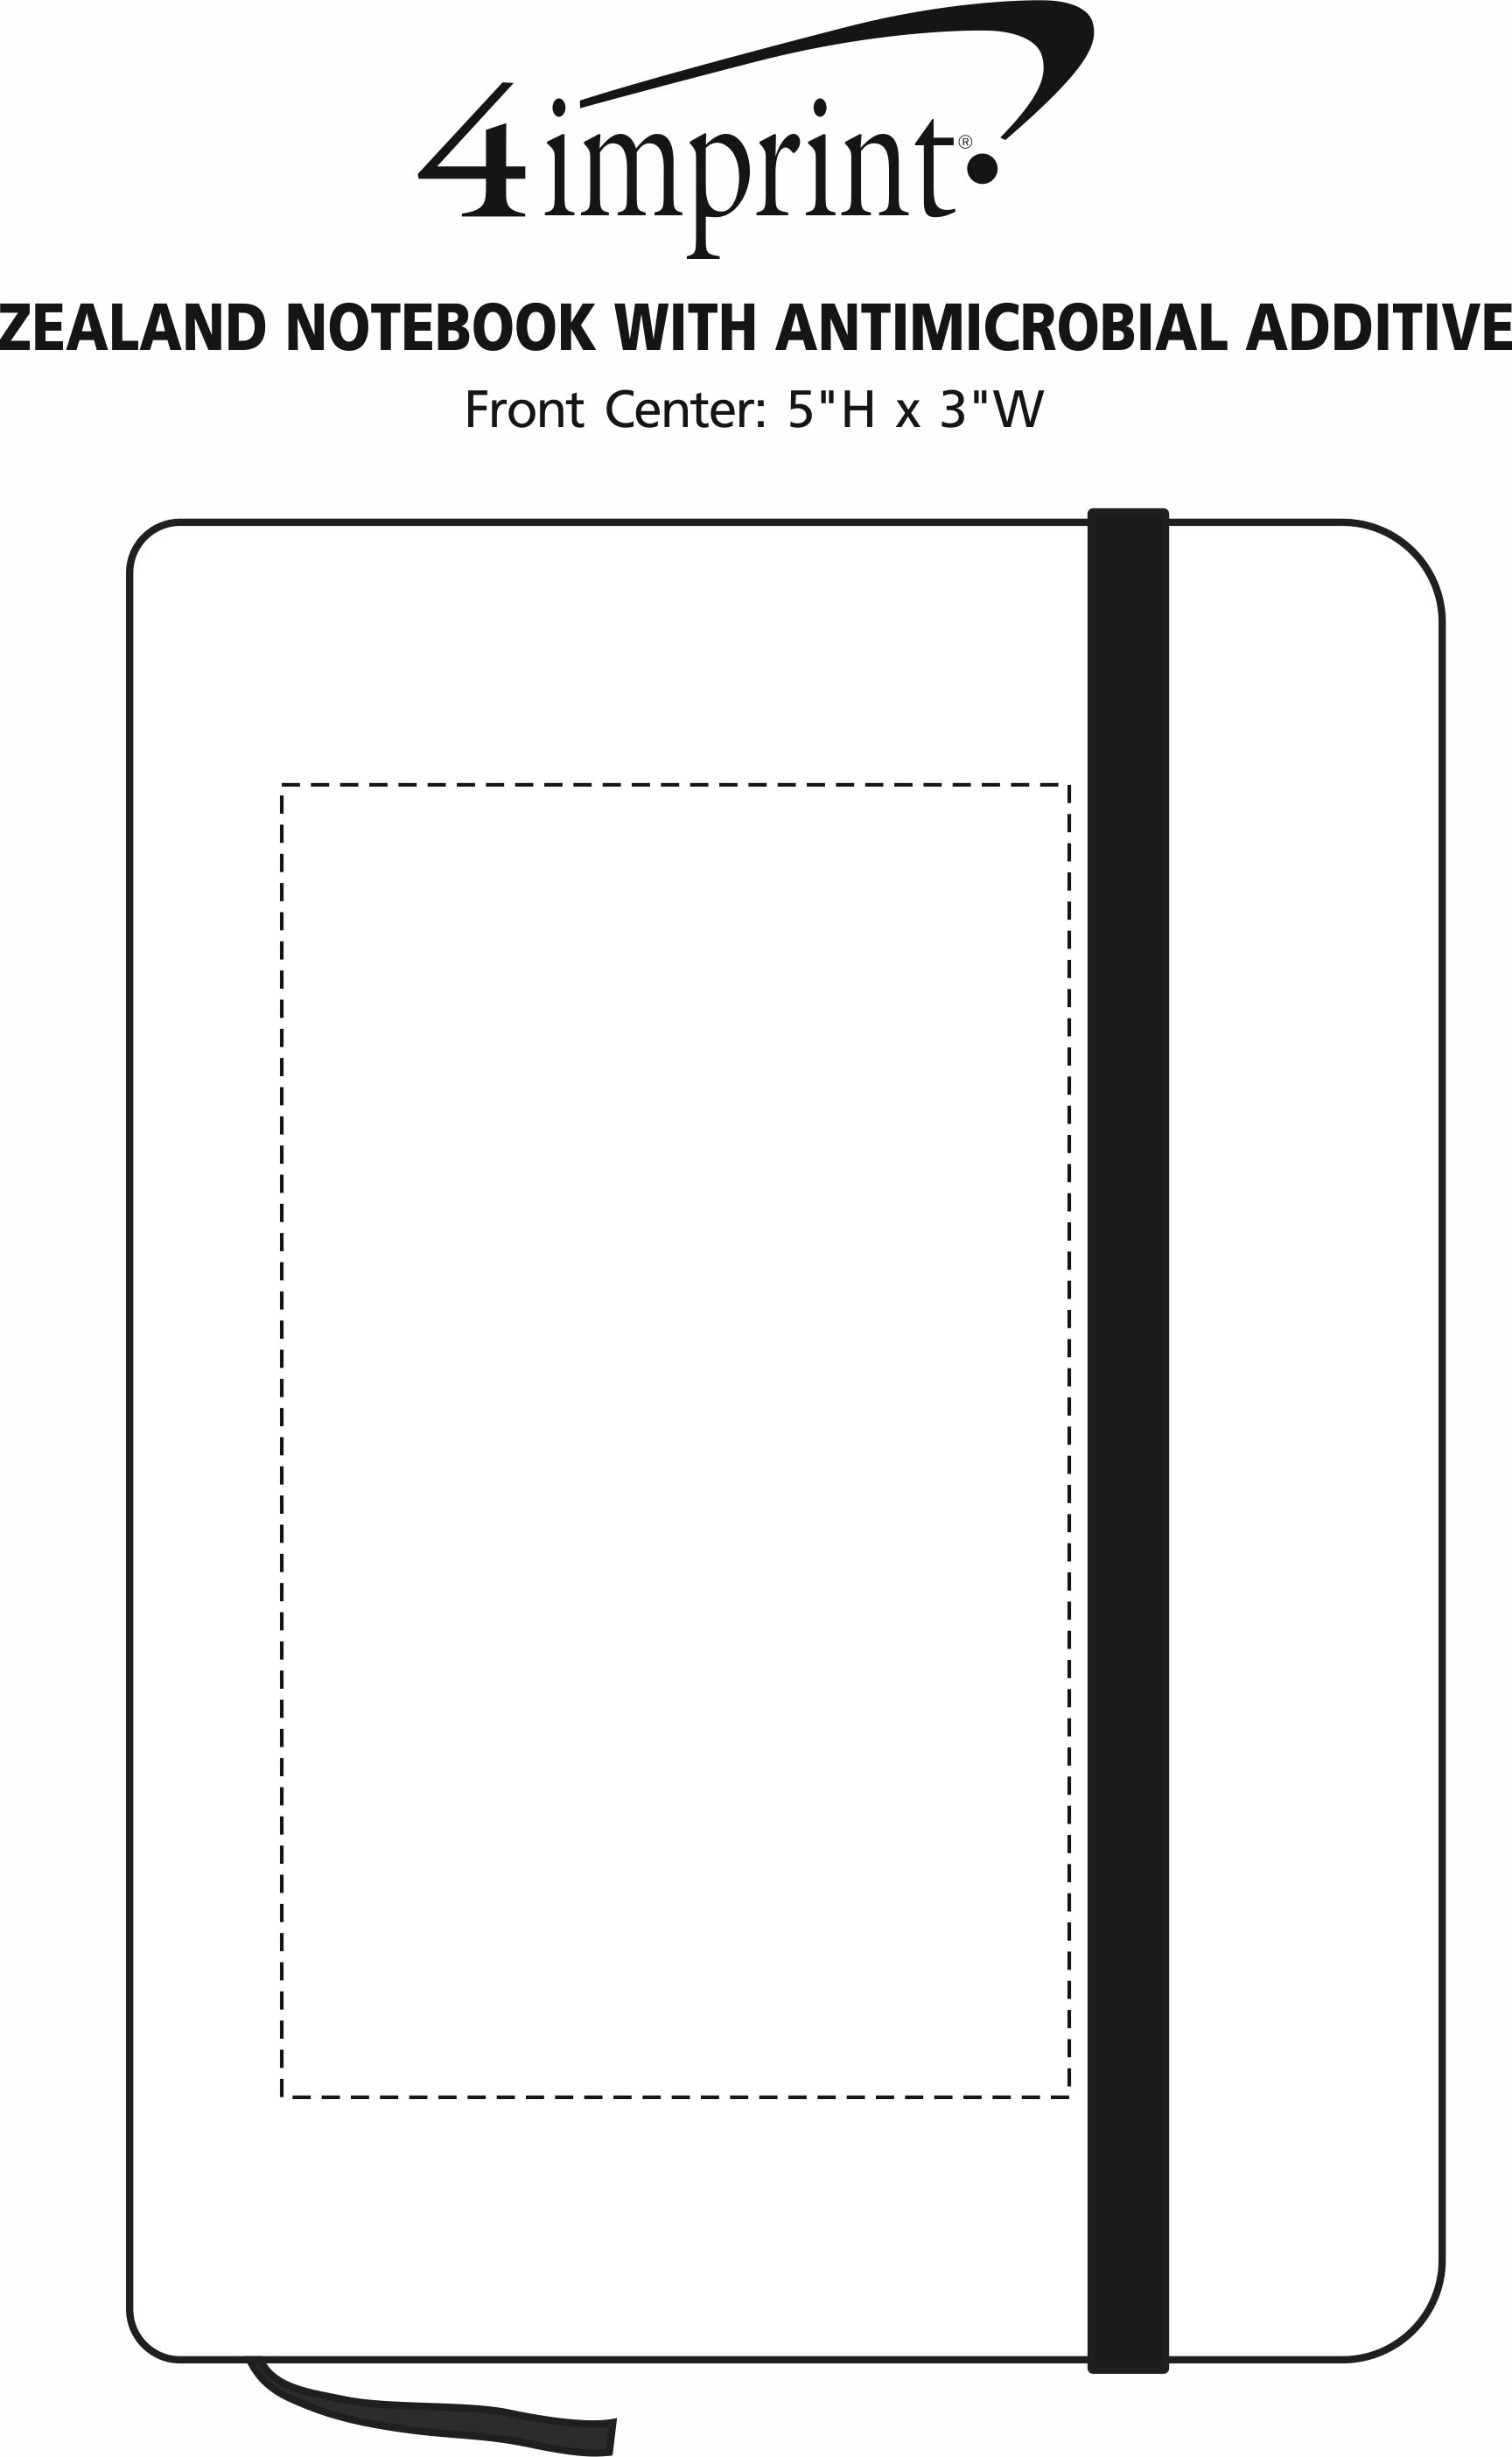 Imprint Area of Zealand Notebook with Antimicrobial Additive